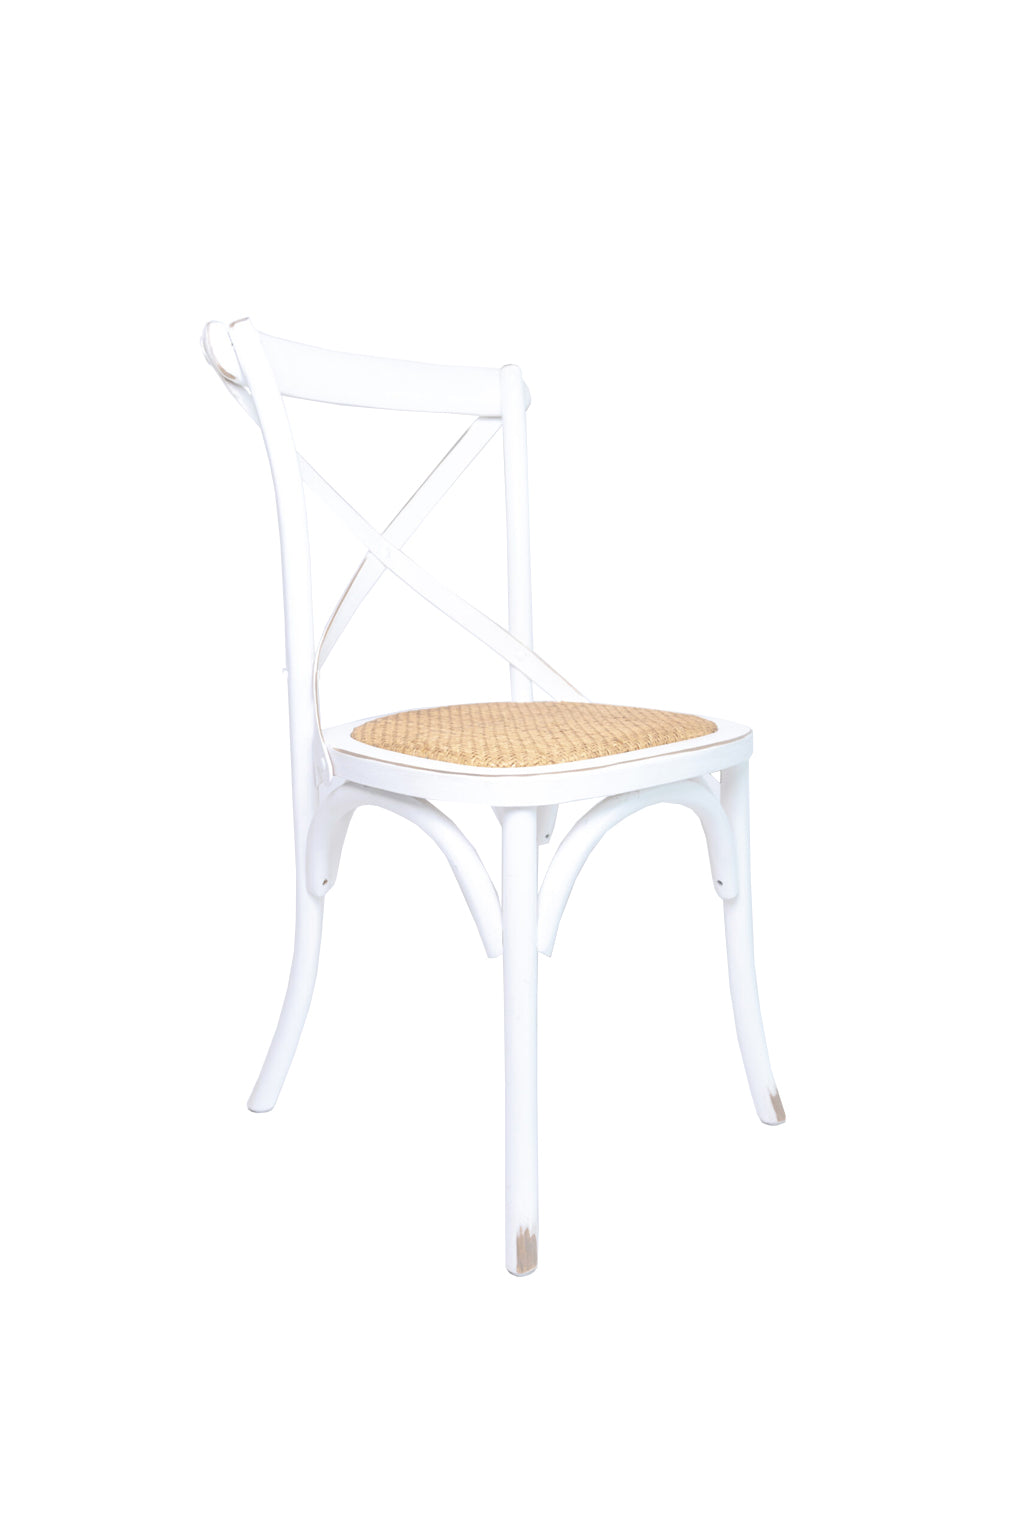 Crossback Chair with Natural Rattan Seat – White